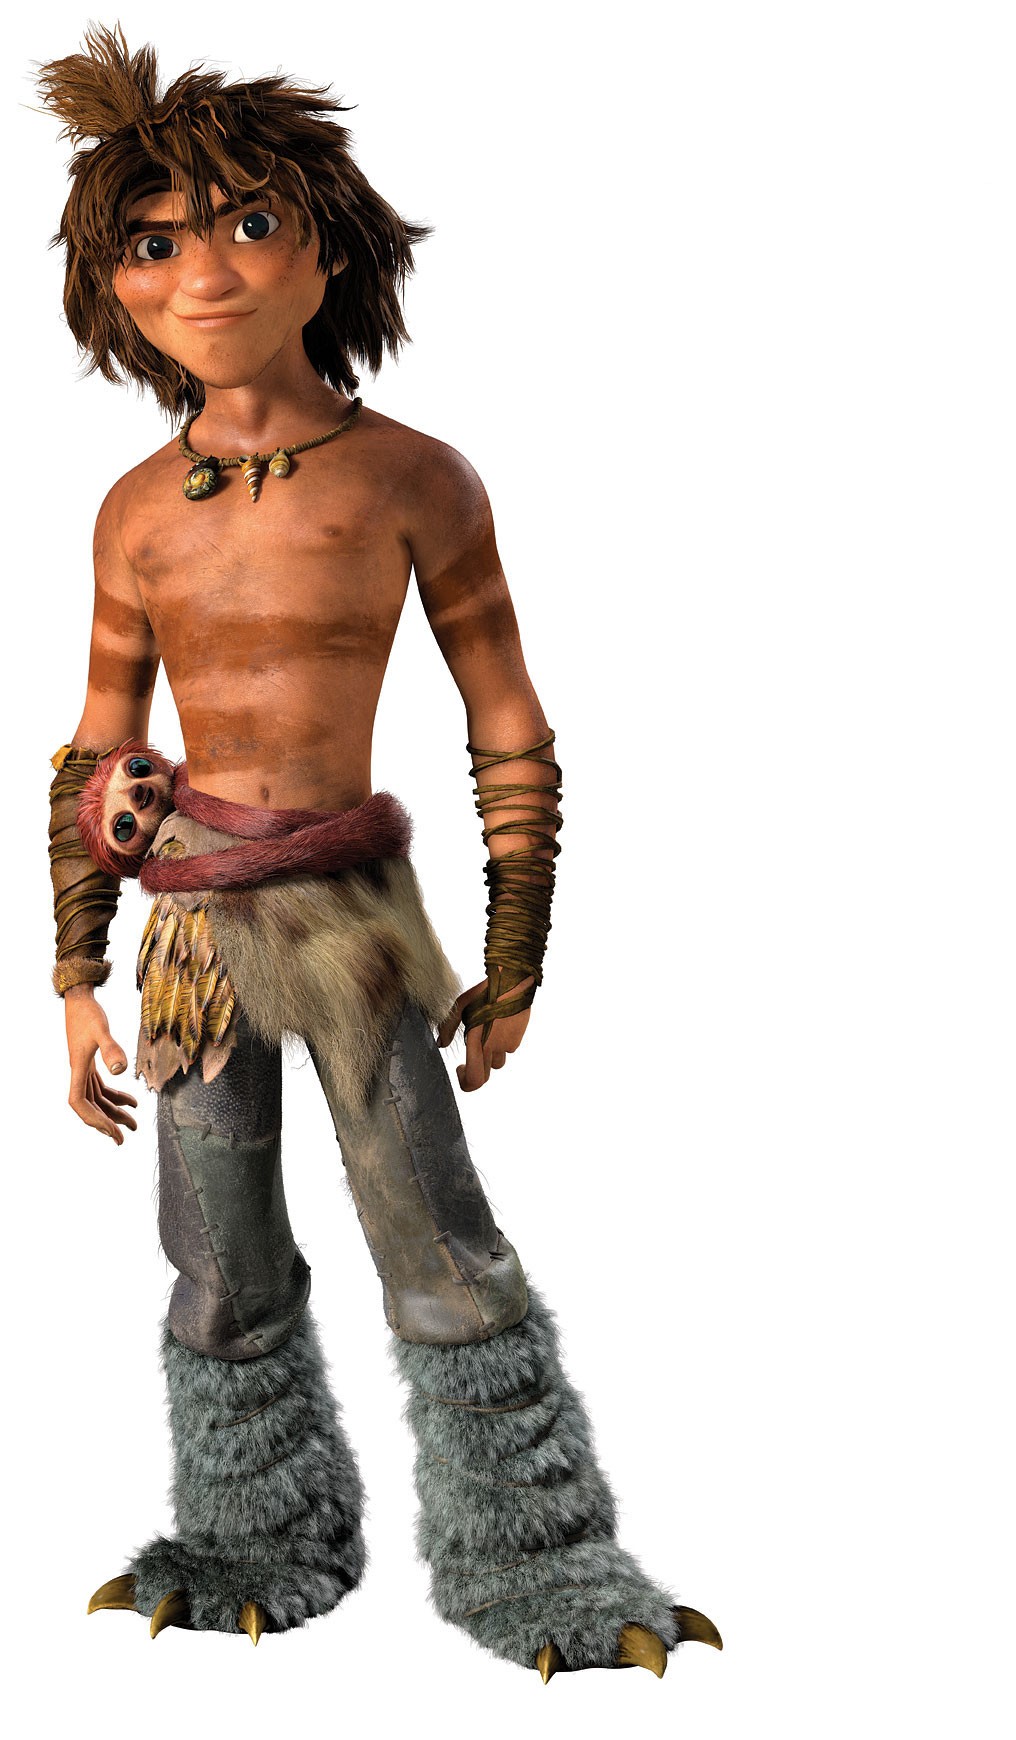 Guy from 20th Century Fox's The Croods (2013)